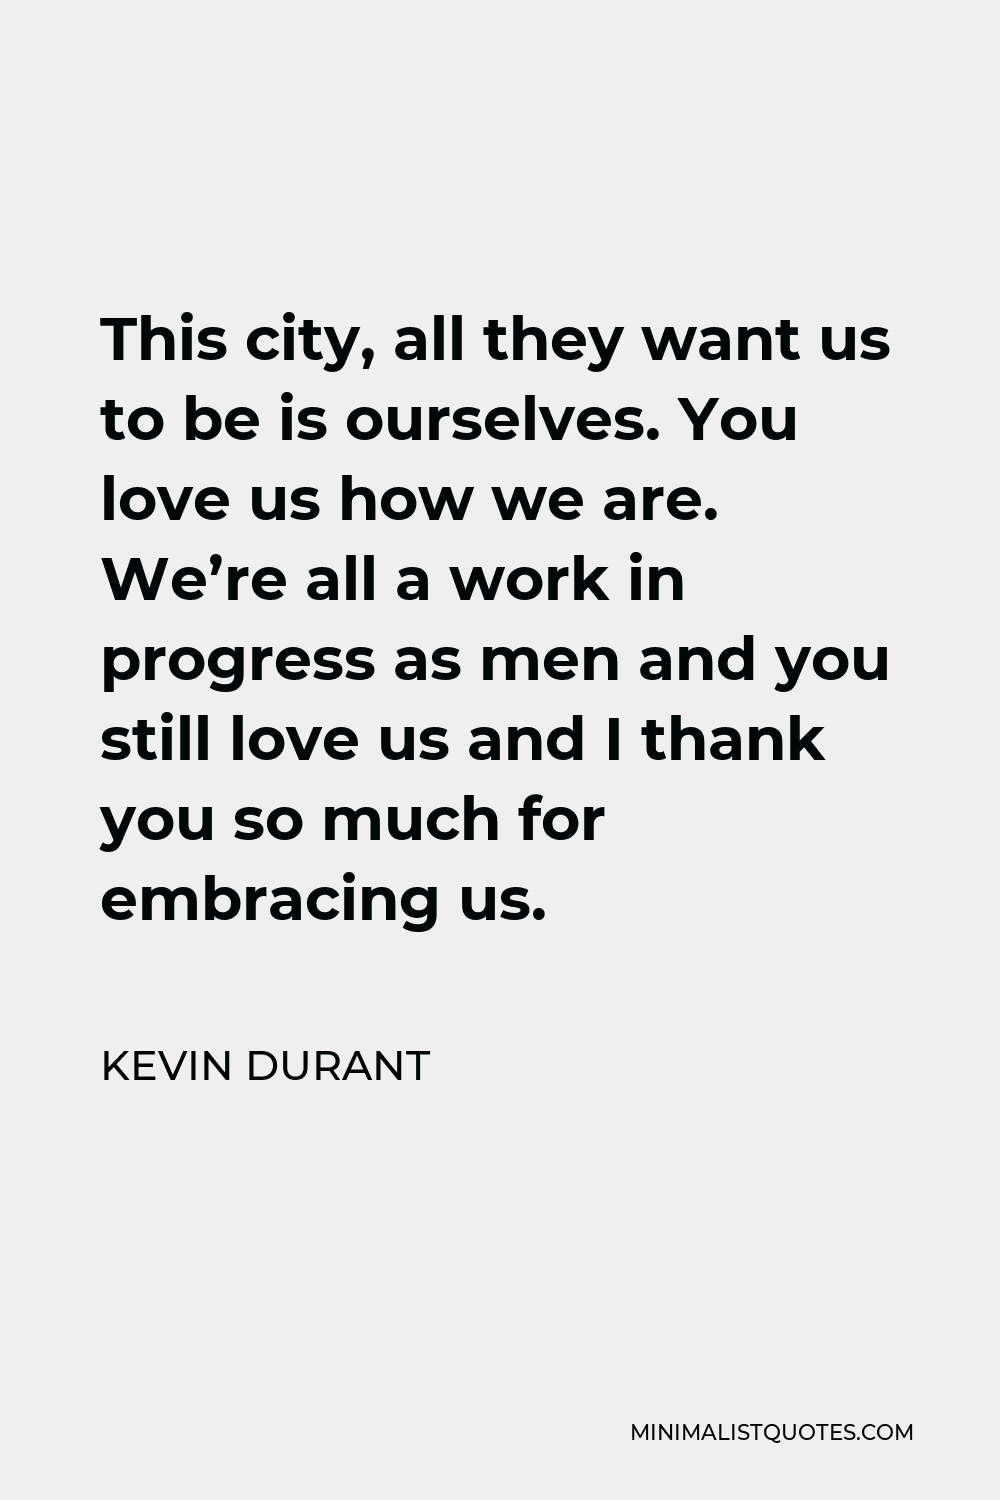 Kevin Durant Quote - This city, all they want us to be is ourselves. You love us how we are. We’re all a work in progress as men and you still love us and I thank you so much for embracing us.